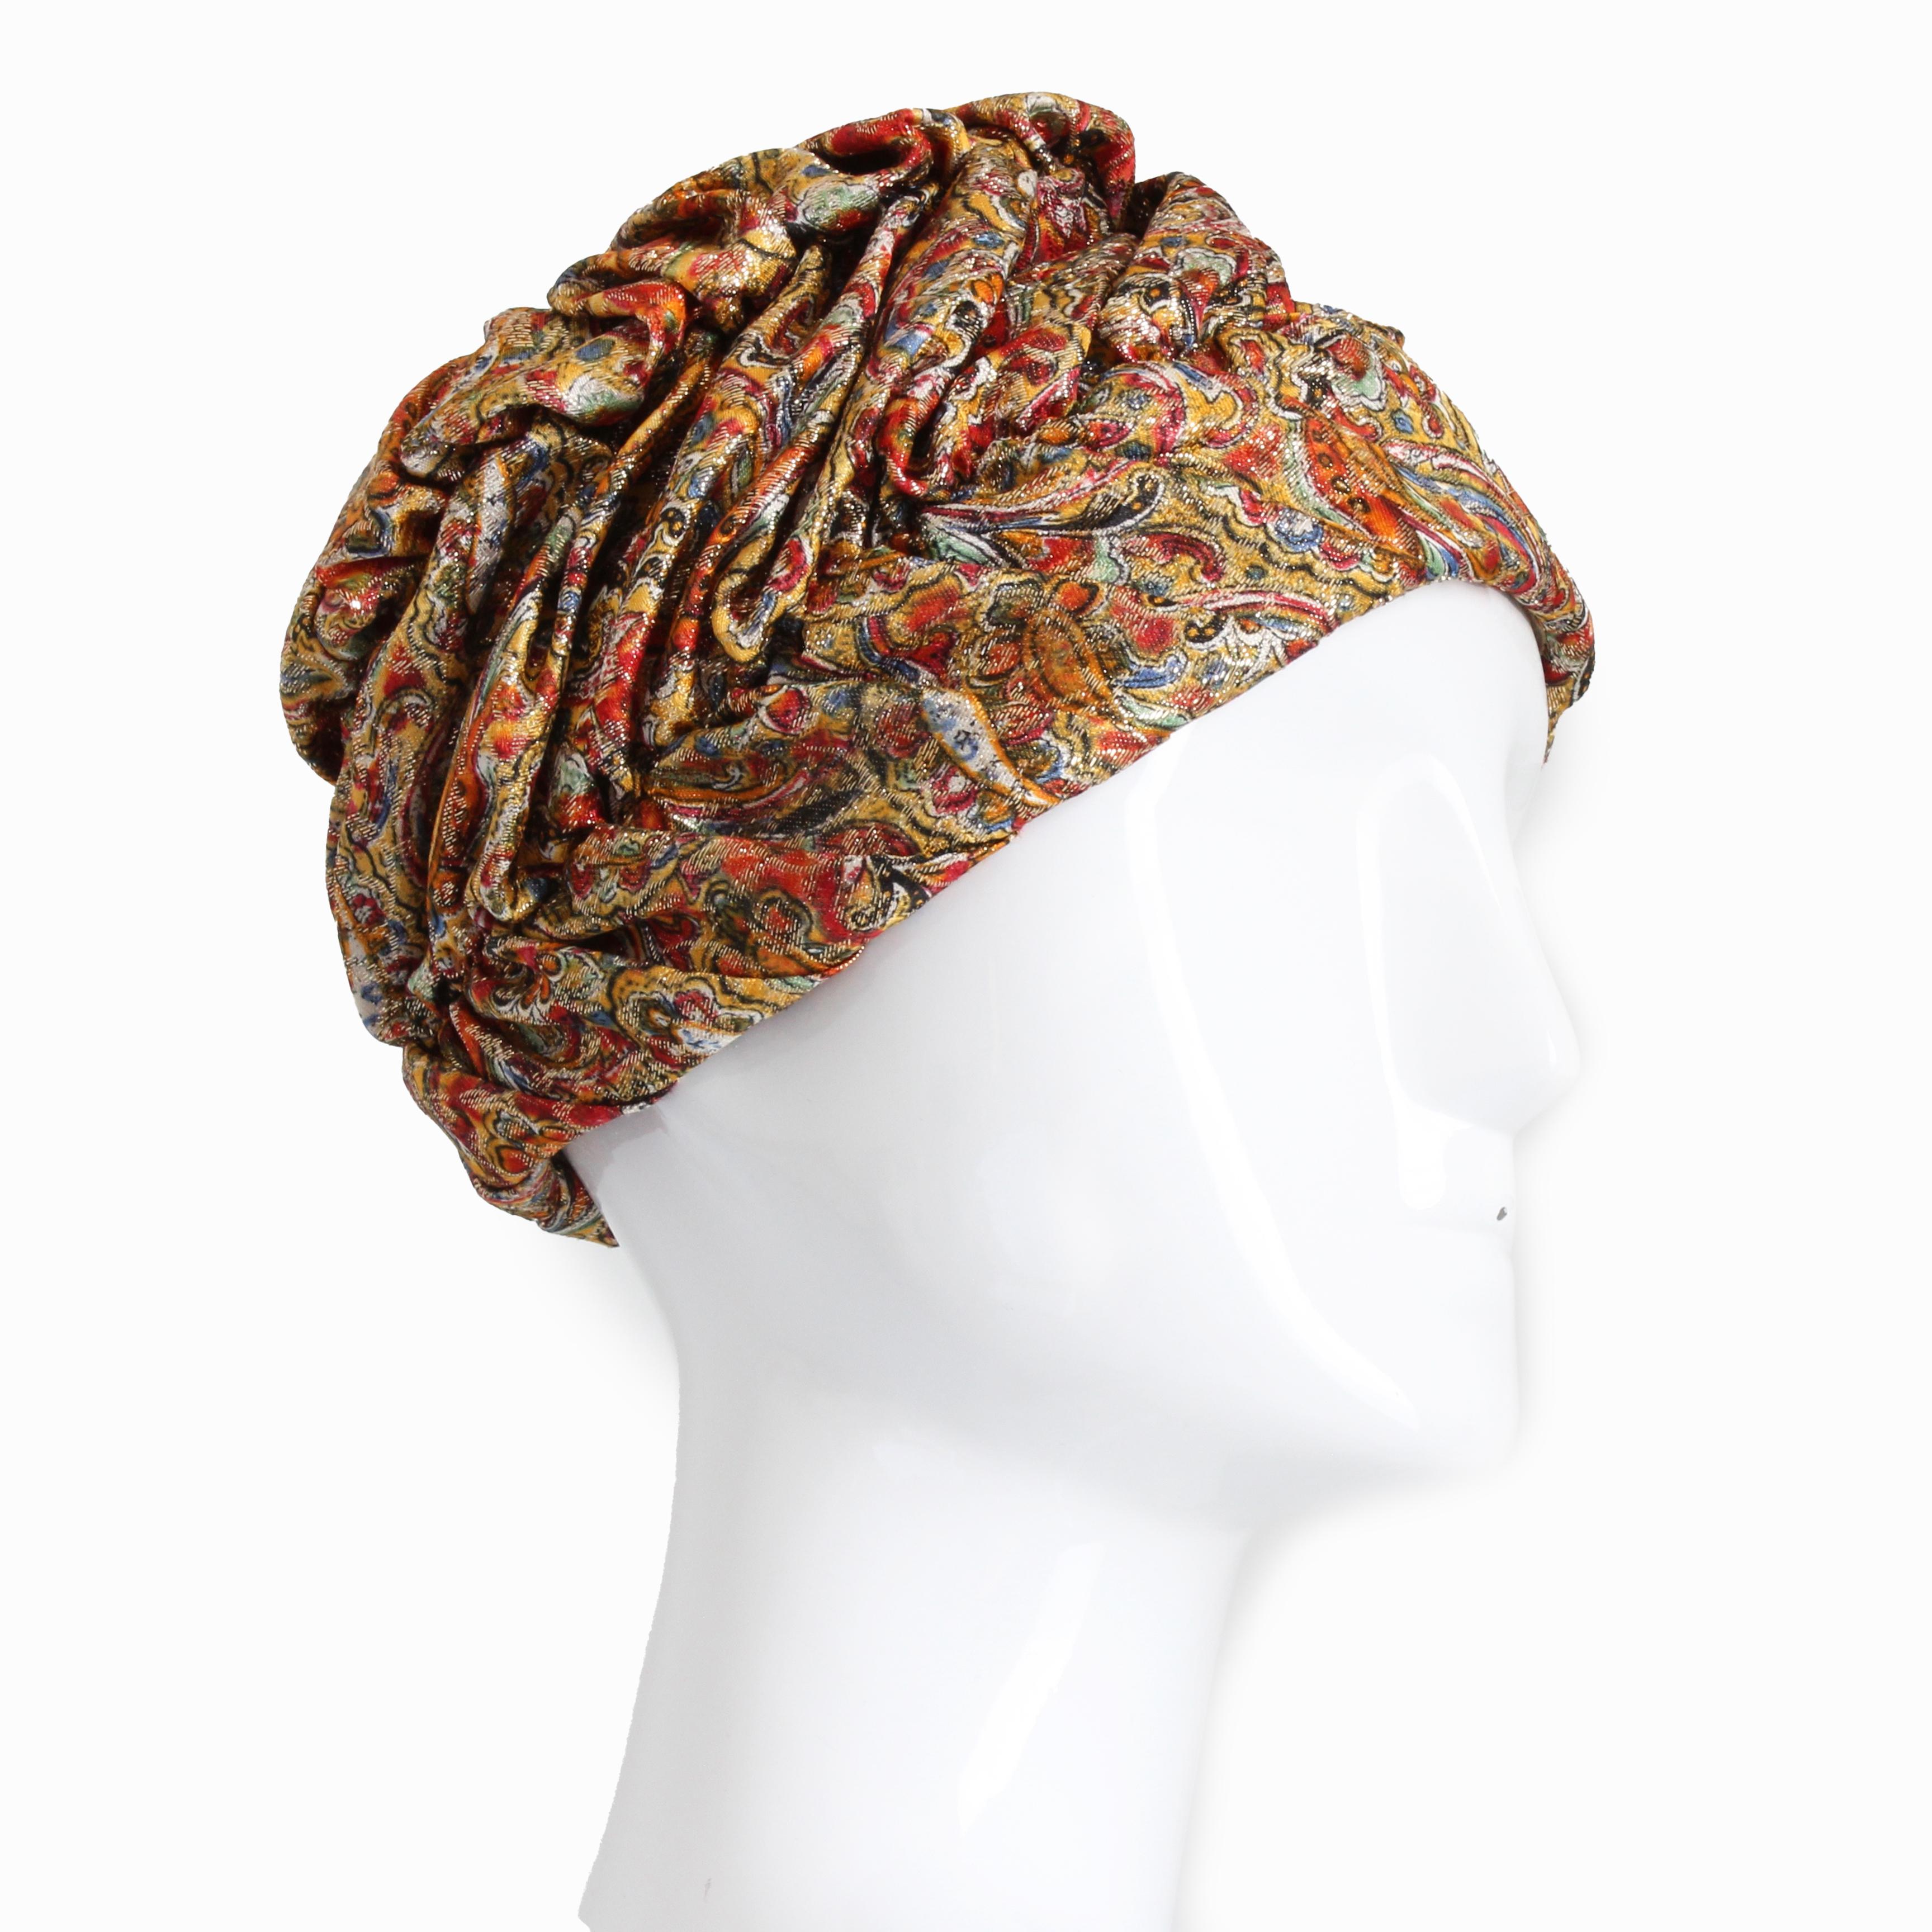 This fabulous vintage turban style hat was made by Marshall Field & Company, most likely in the early 1950s. 

Made from a shimmery metallic paisley fabric, it is fully lined in cream silk with netting overlay.   

Definitely a jet set retro vibe